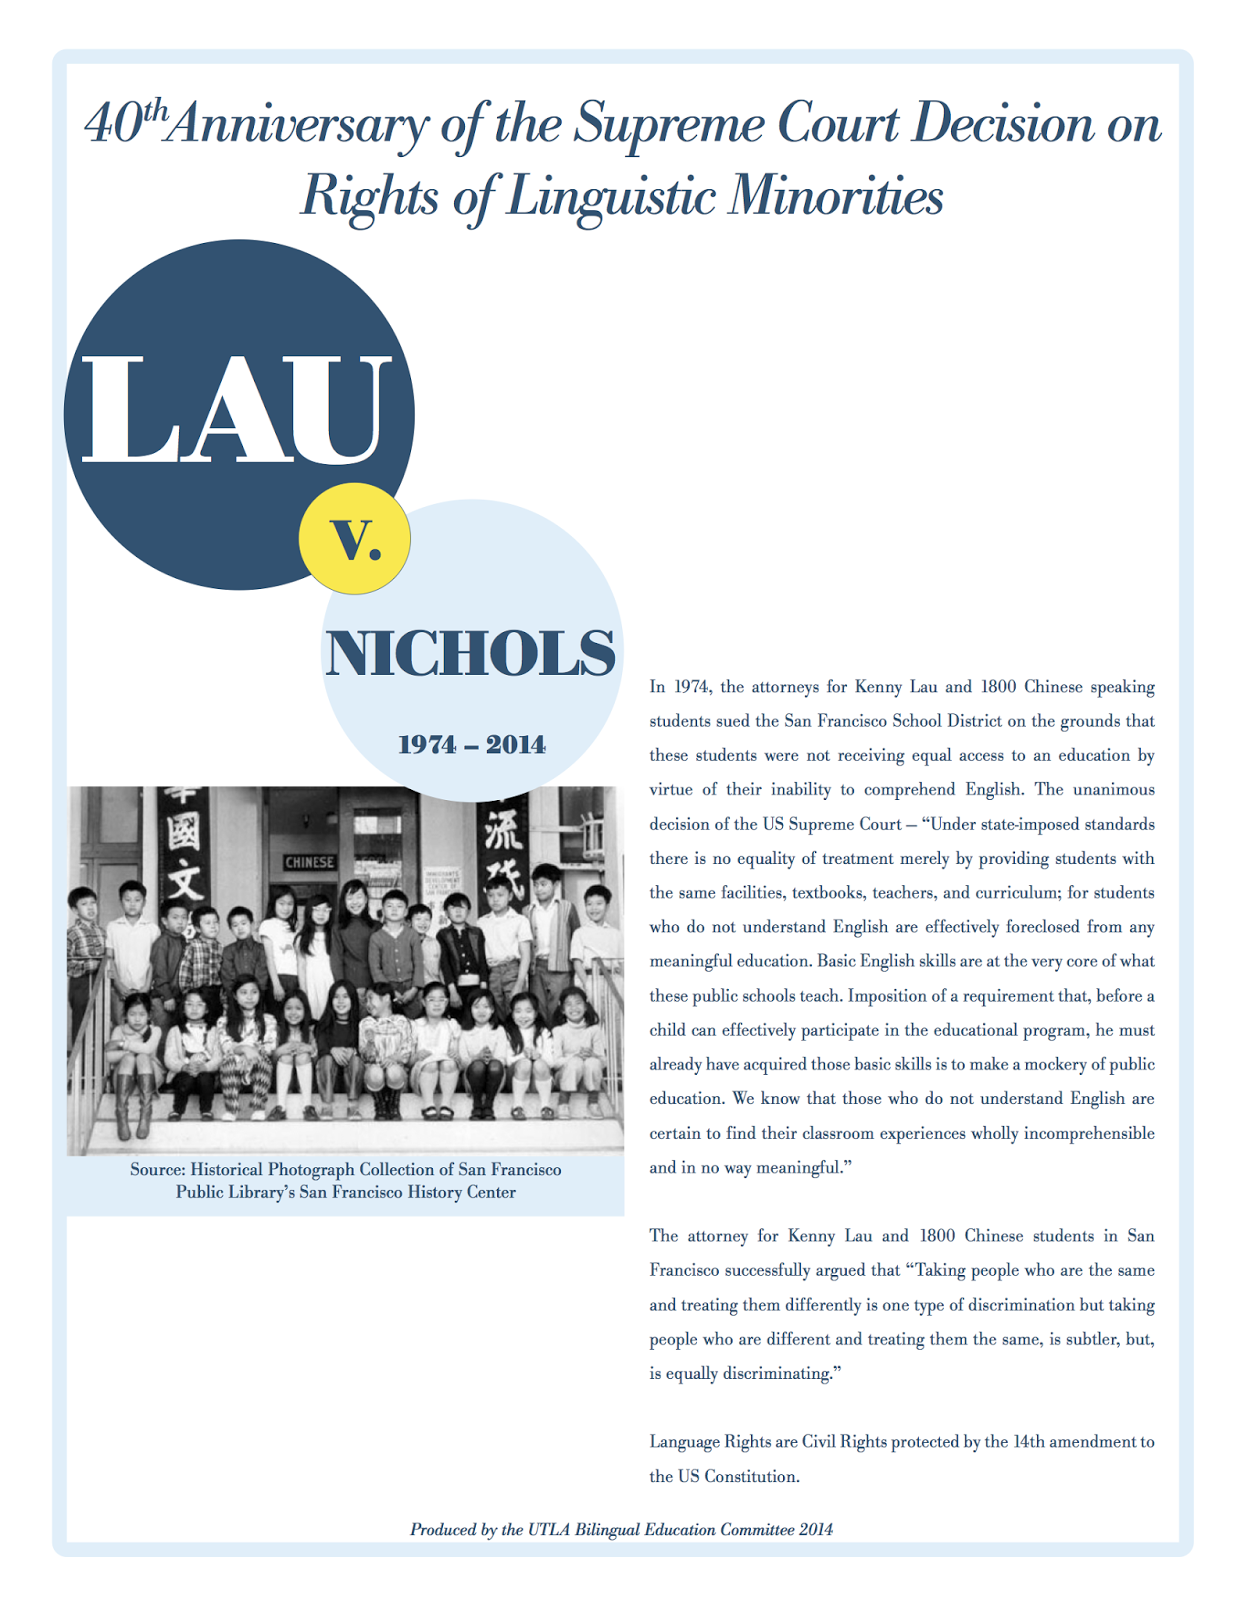 40th Anniversary of the Supreme Court Decision on Rights of Linguistic Minorities